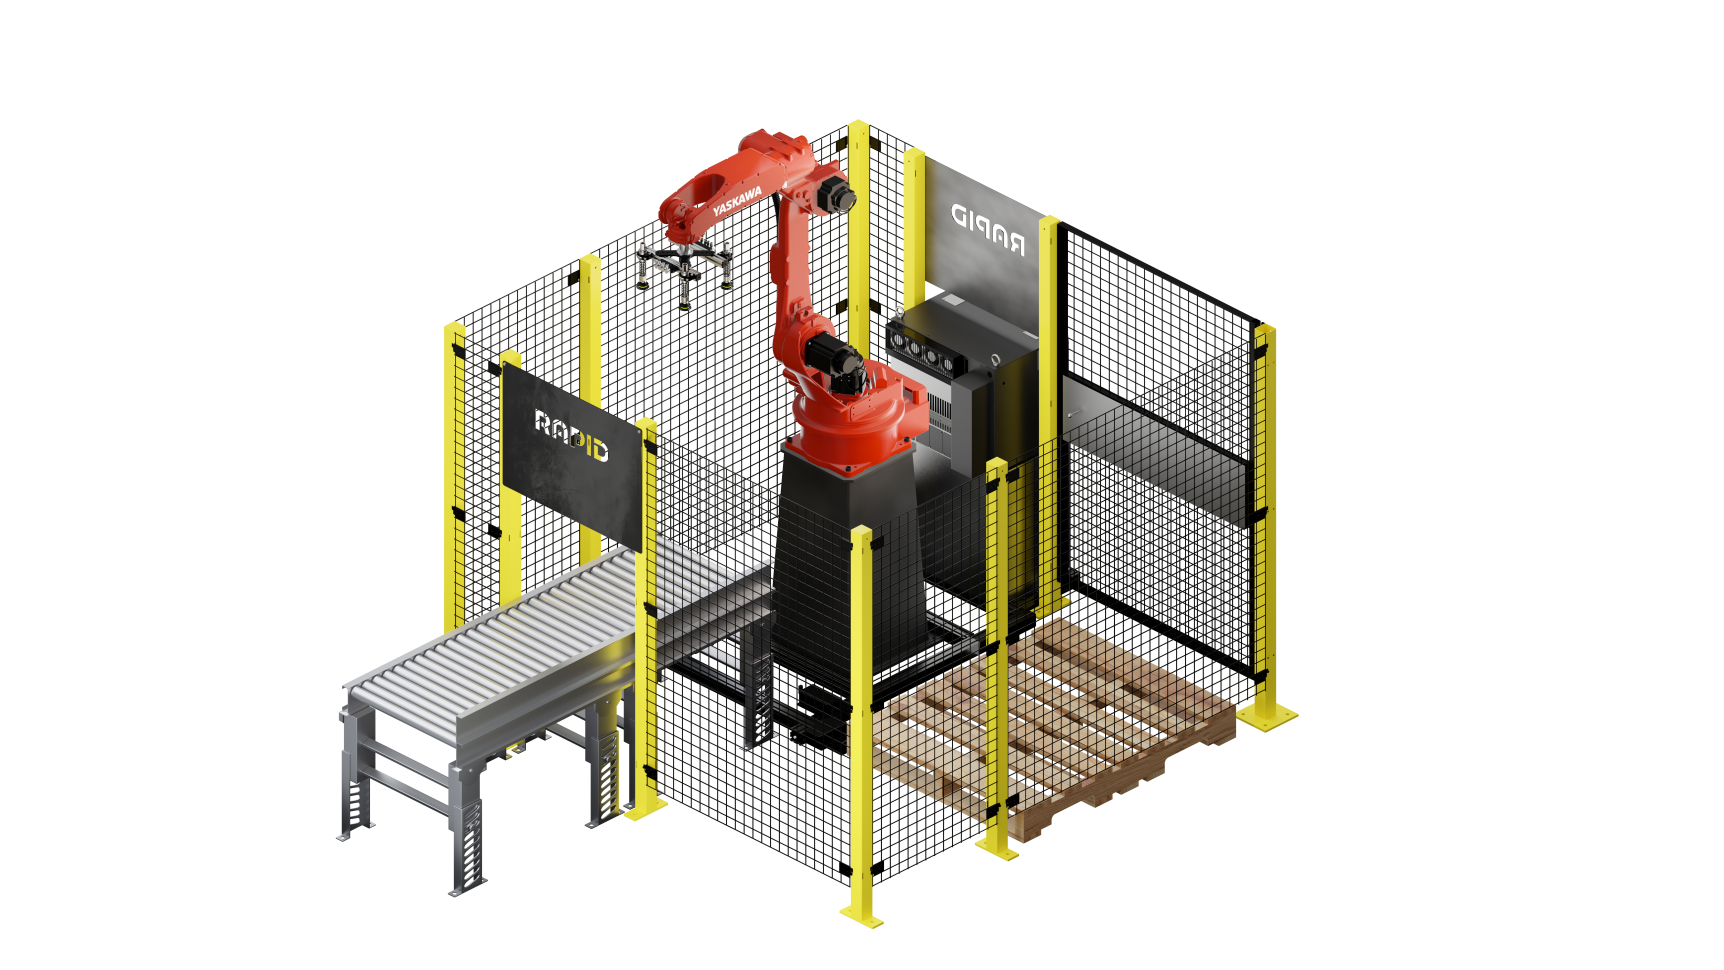 A red industrial robot arm in a fenced workcell. The arm is ready to pick from an infeed belt in front of it, and place a box on a wooden pallet on the right side of the image.